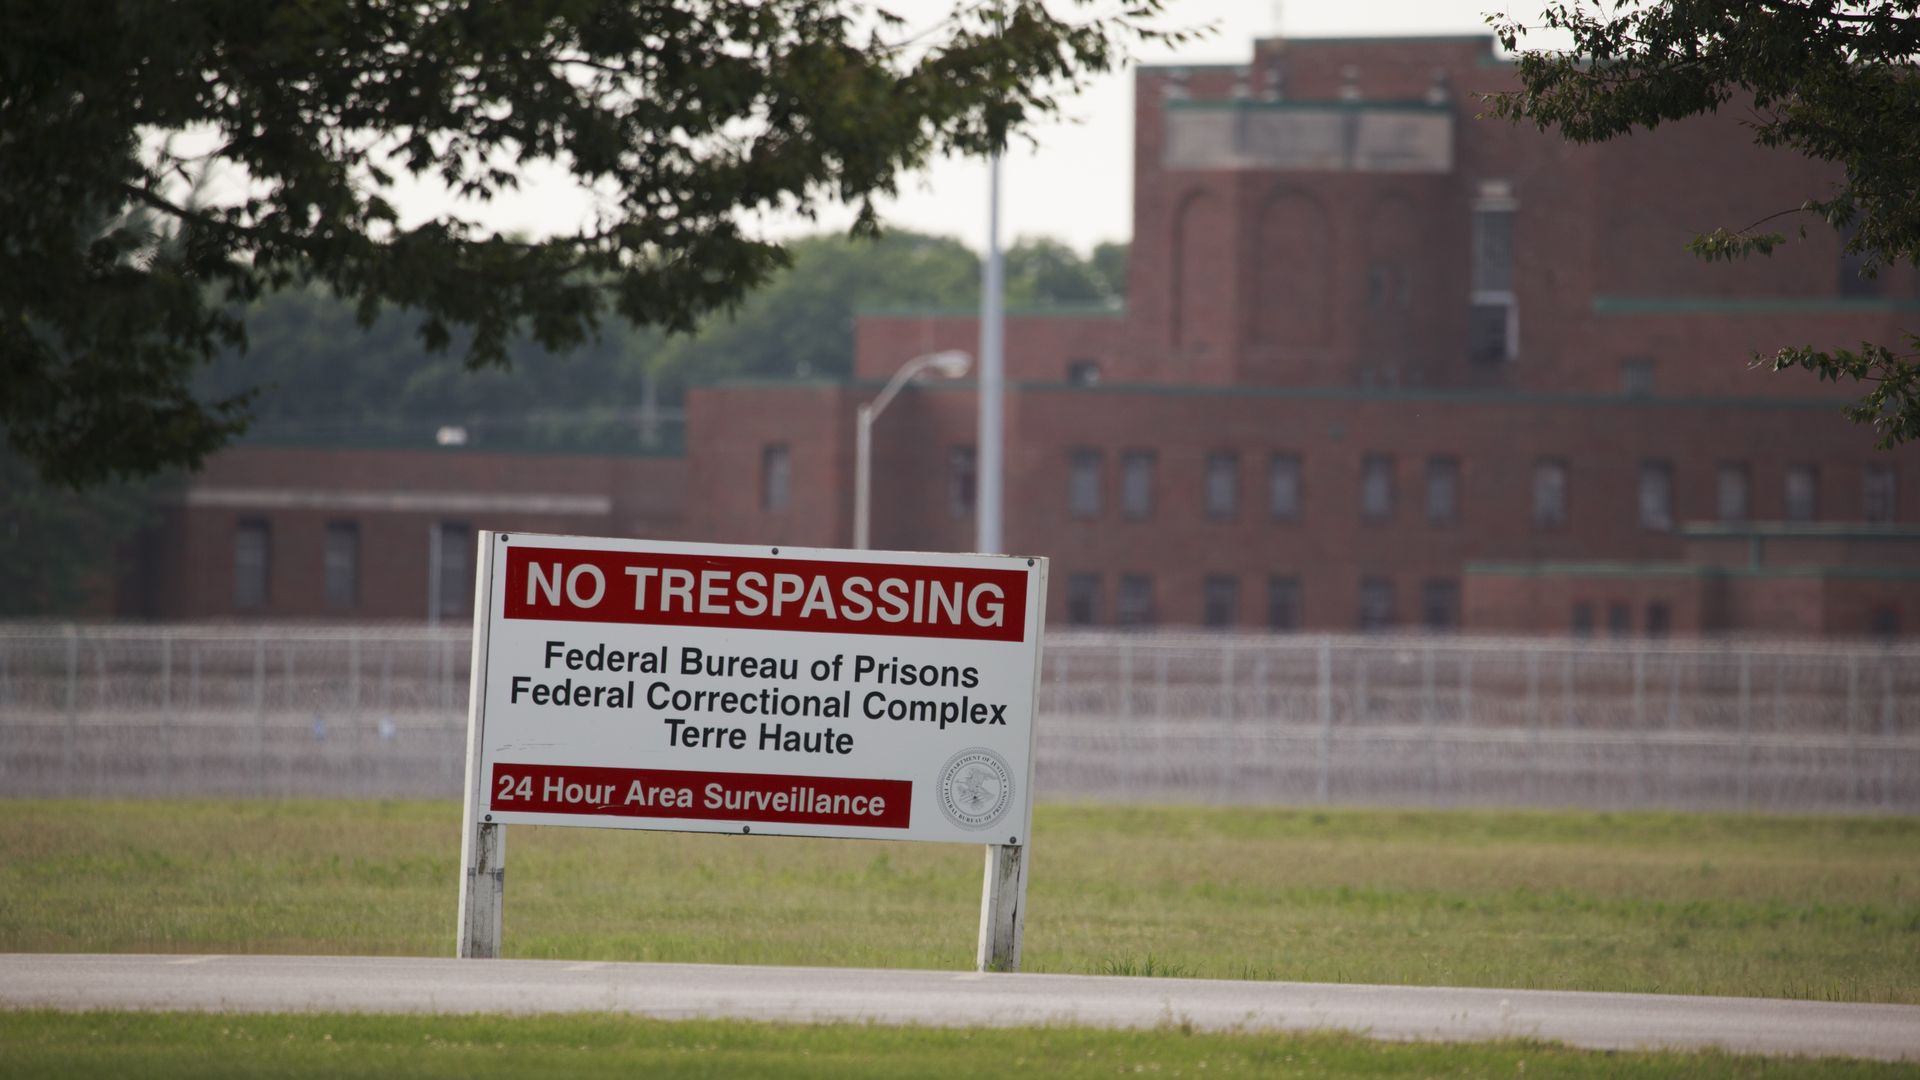 Picture of a sign in front of the Terre Haute Federal Correctional Complex indicating that the area is under surveillance.